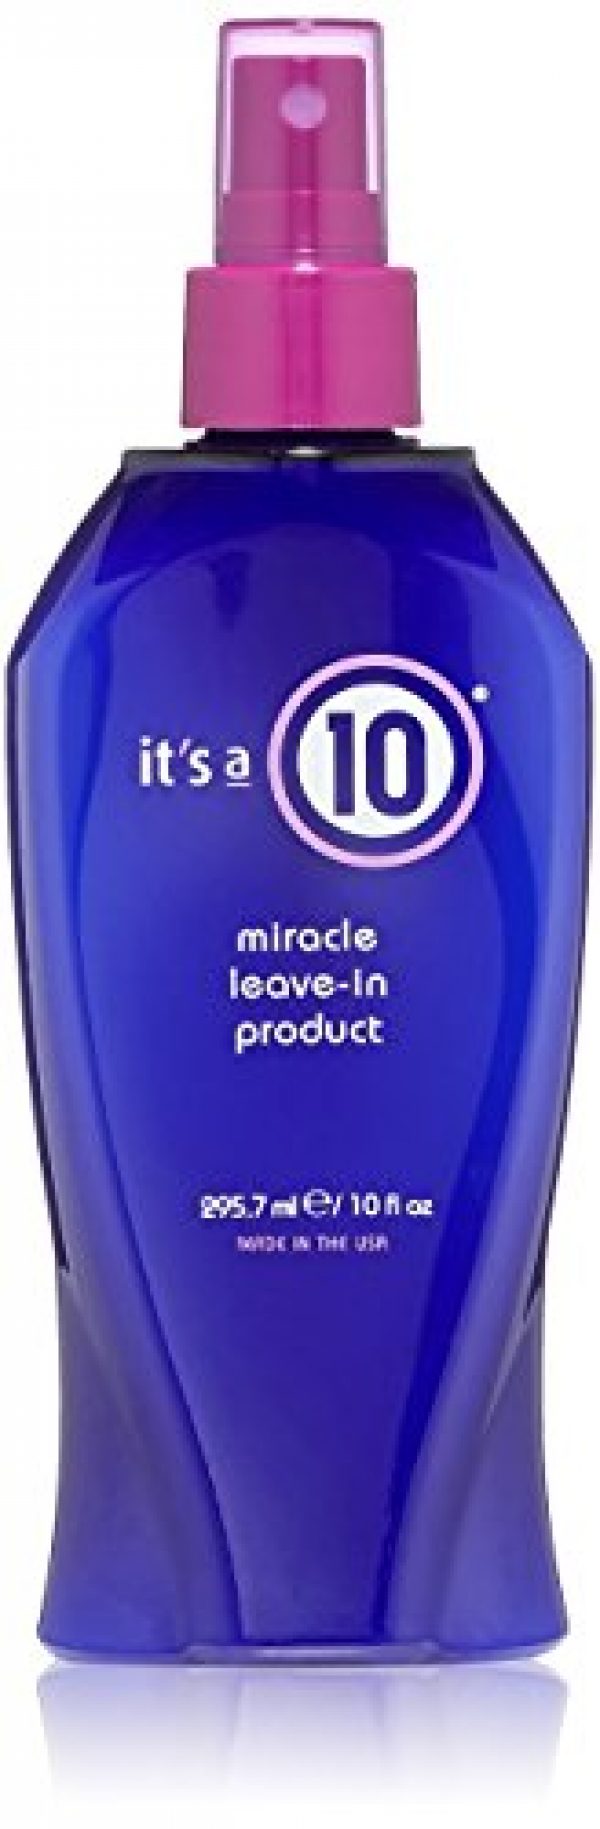 It's A 10 Haircare Miracle Leave-In Conditioner Spray - 10 oz. - 1ct 18